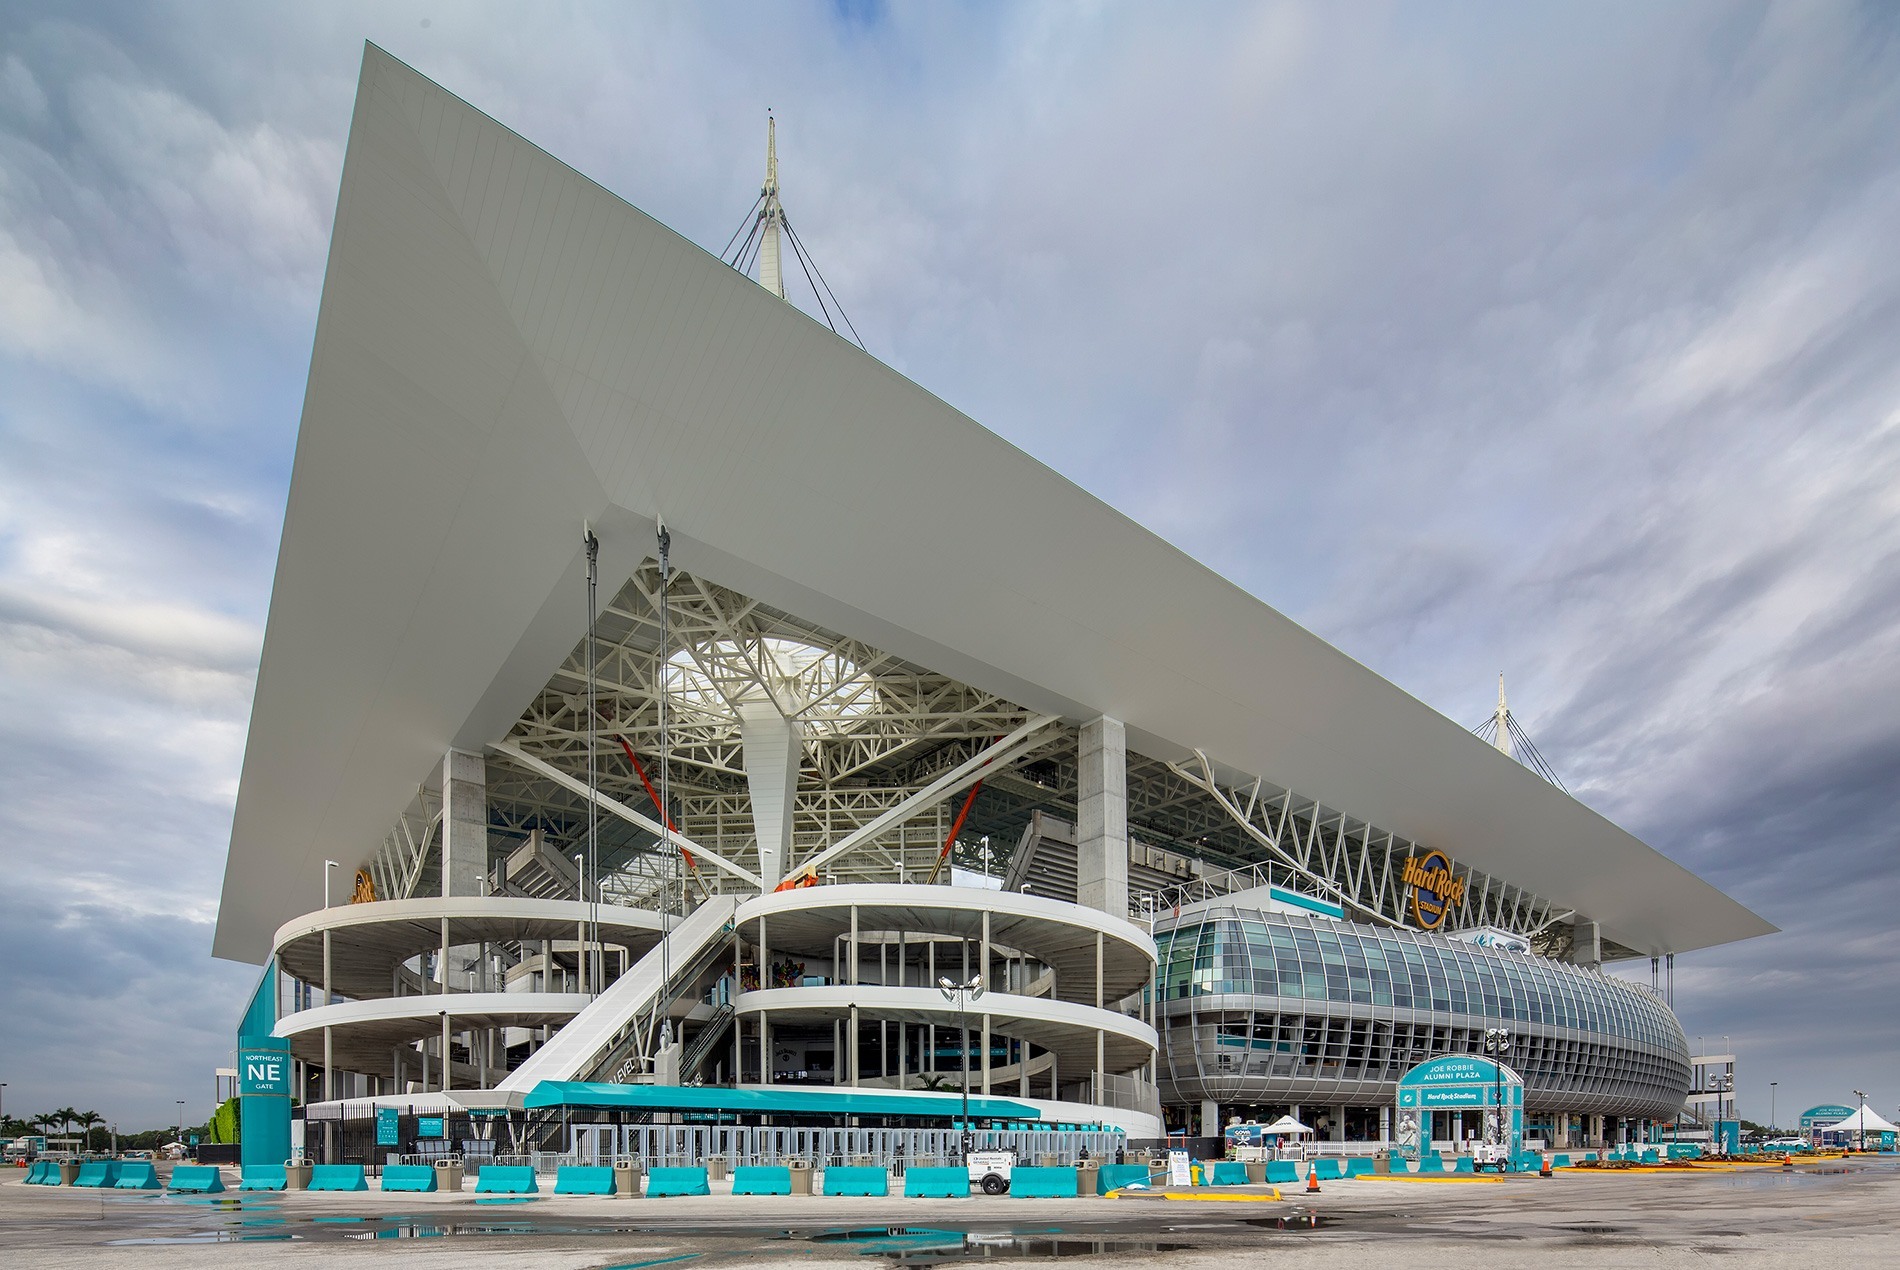 The renovated Hard Rock Stadium in Miami includes a shade structure. (HOK Architects)